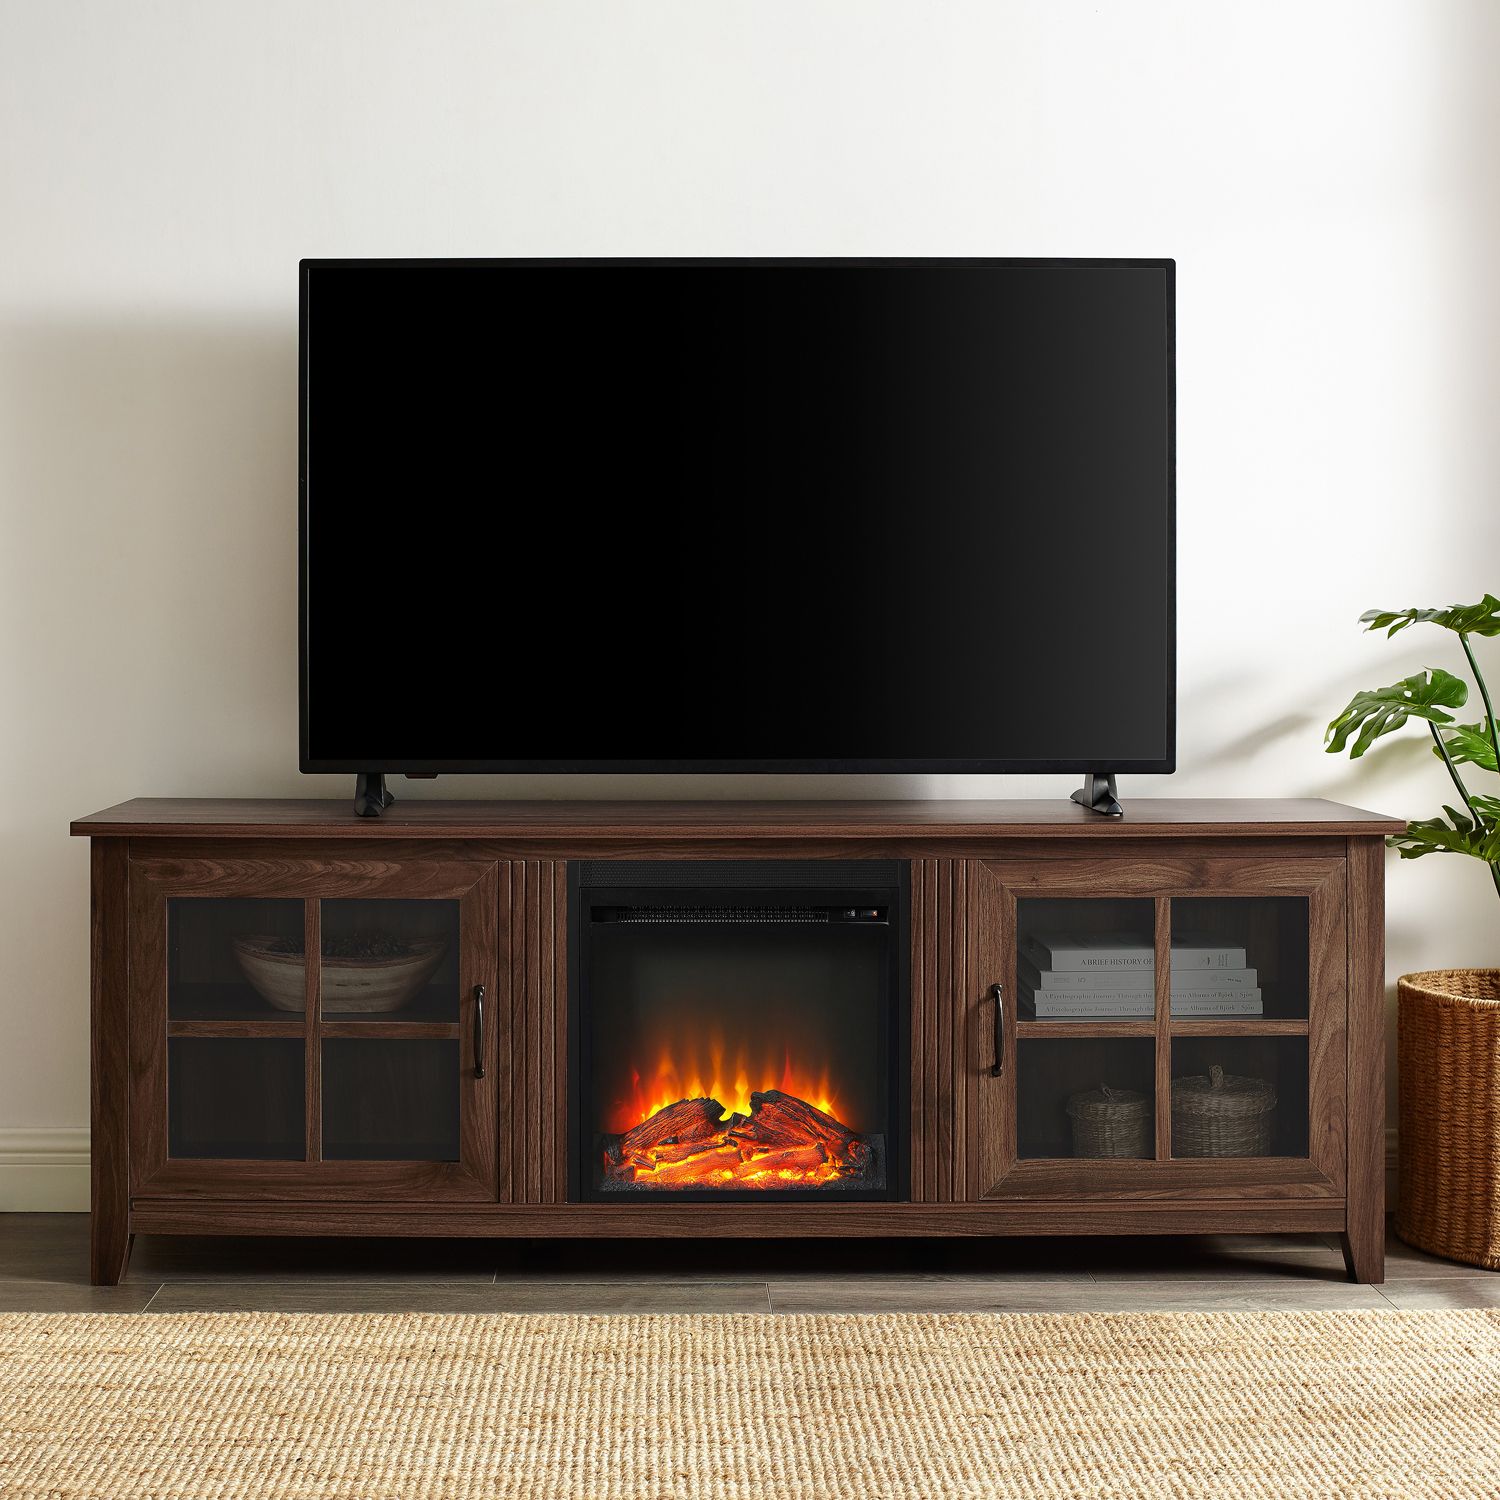 Rustic 70" Fireplace Tv Stand With Glass Doors – Pier1 Within Glass Tv Cabinets With Doors (View 8 of 15)